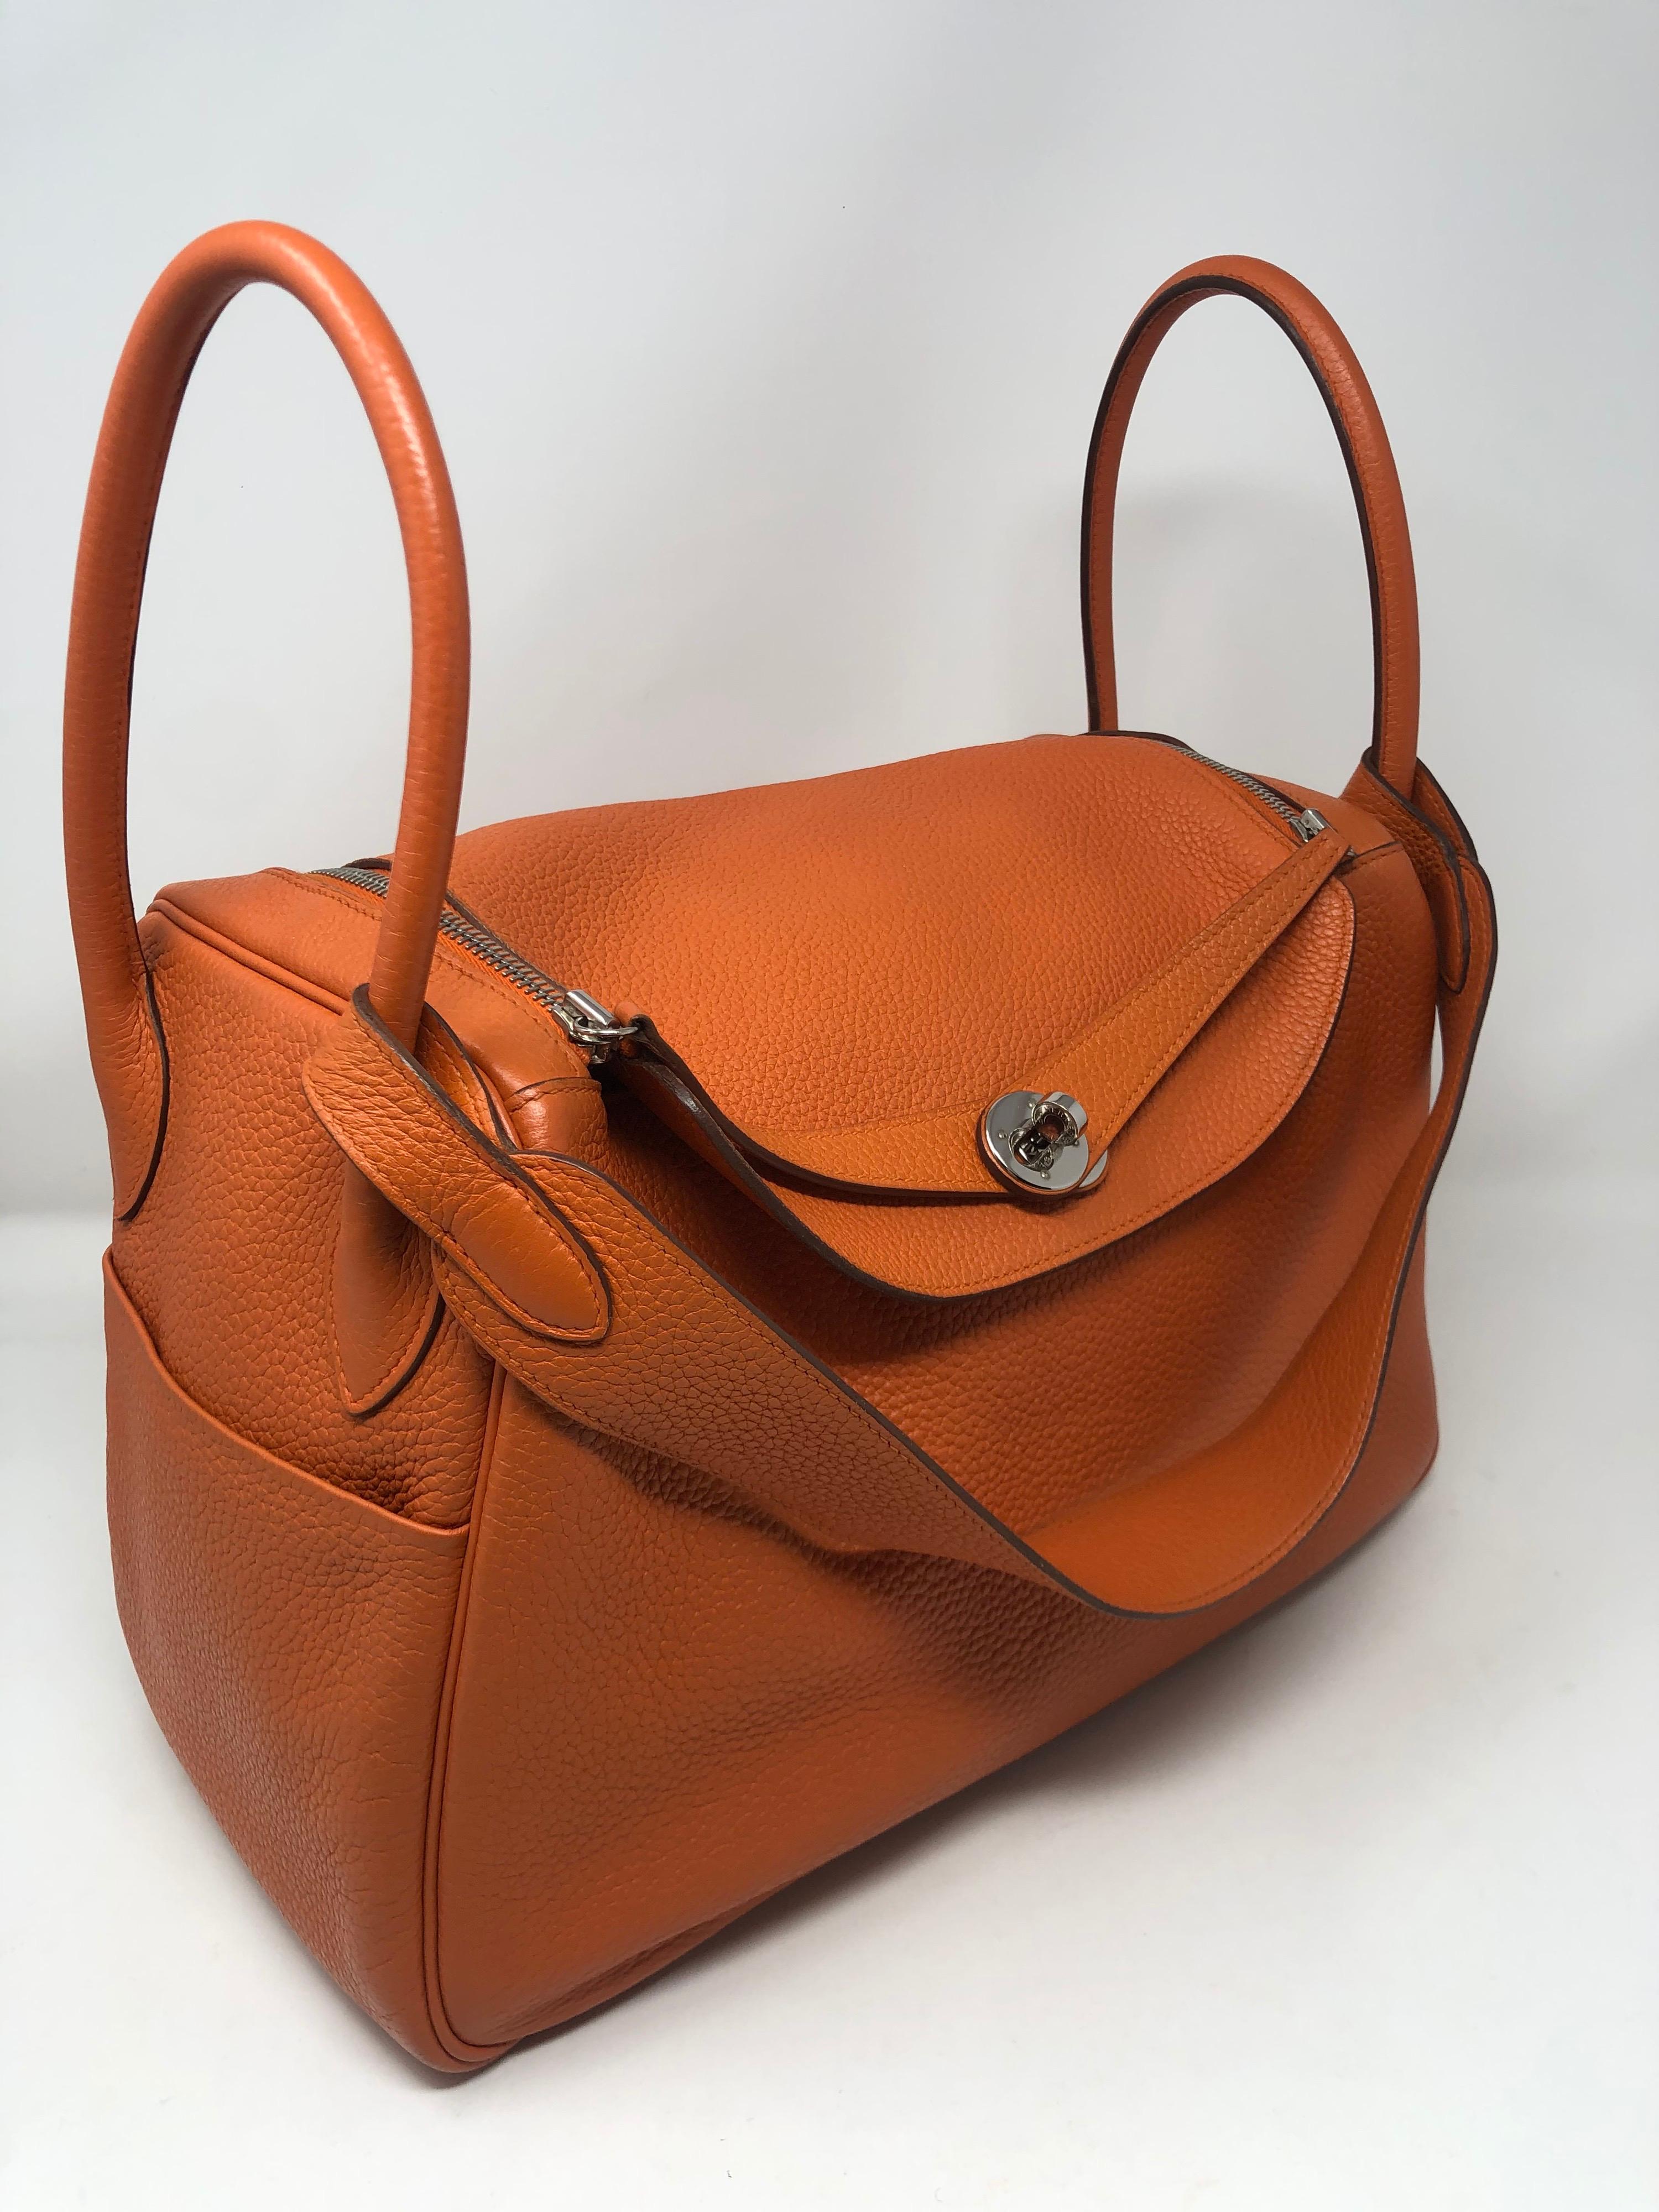 Hermes Lindy 34 Orange Bag. Clemence leather. Palladium hardware. From 2014. R square. Good condition. Beautiful bag. Can be worn 2 ways. Guaranteed authentic. 